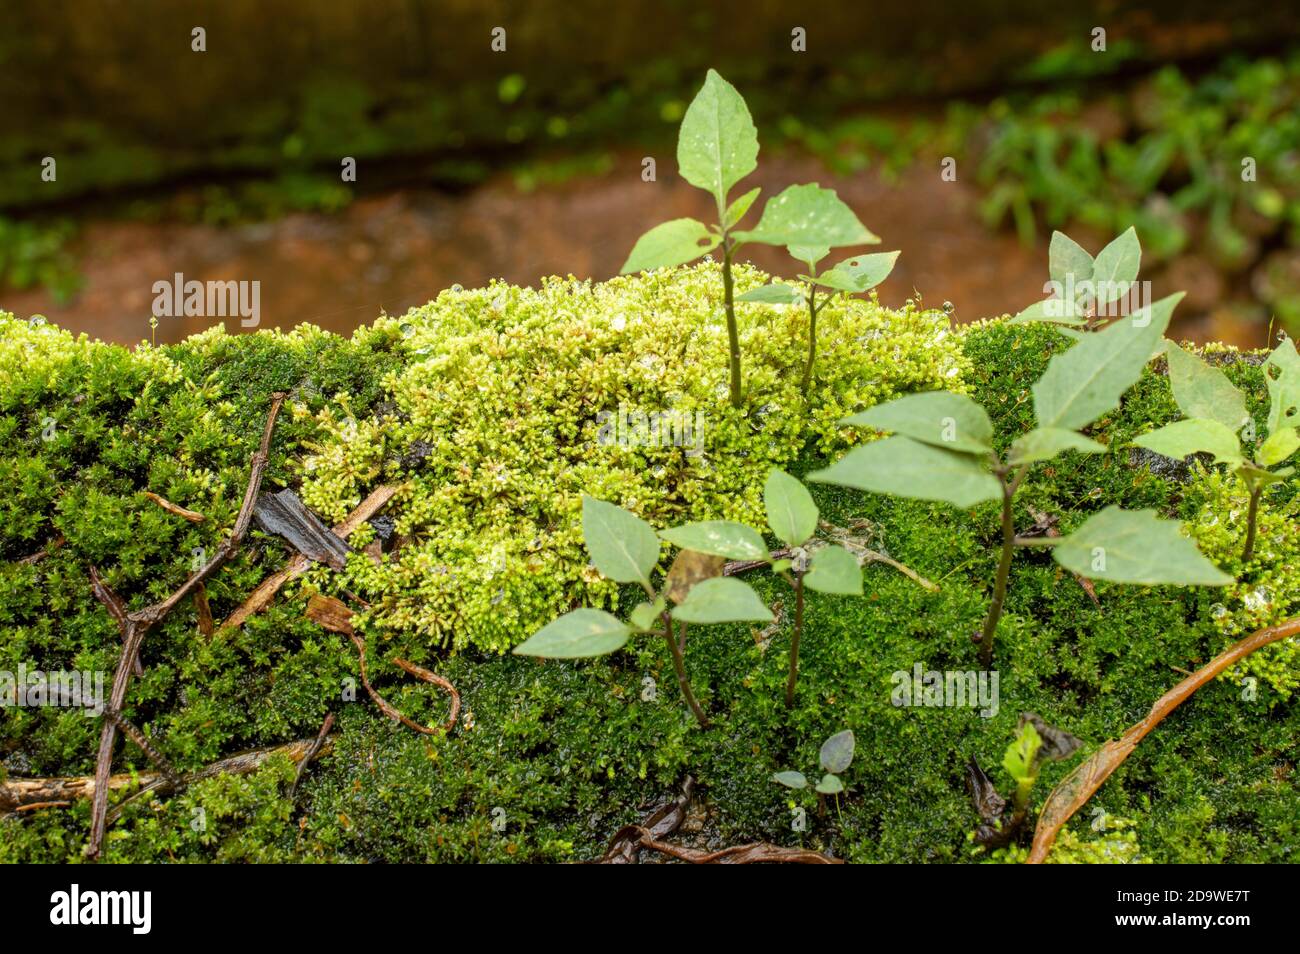 Mosses, or the taxonomic division Bryophyta, are small, non-vascular flowerless plants that typically form dense green clumps or mats Stock Photo